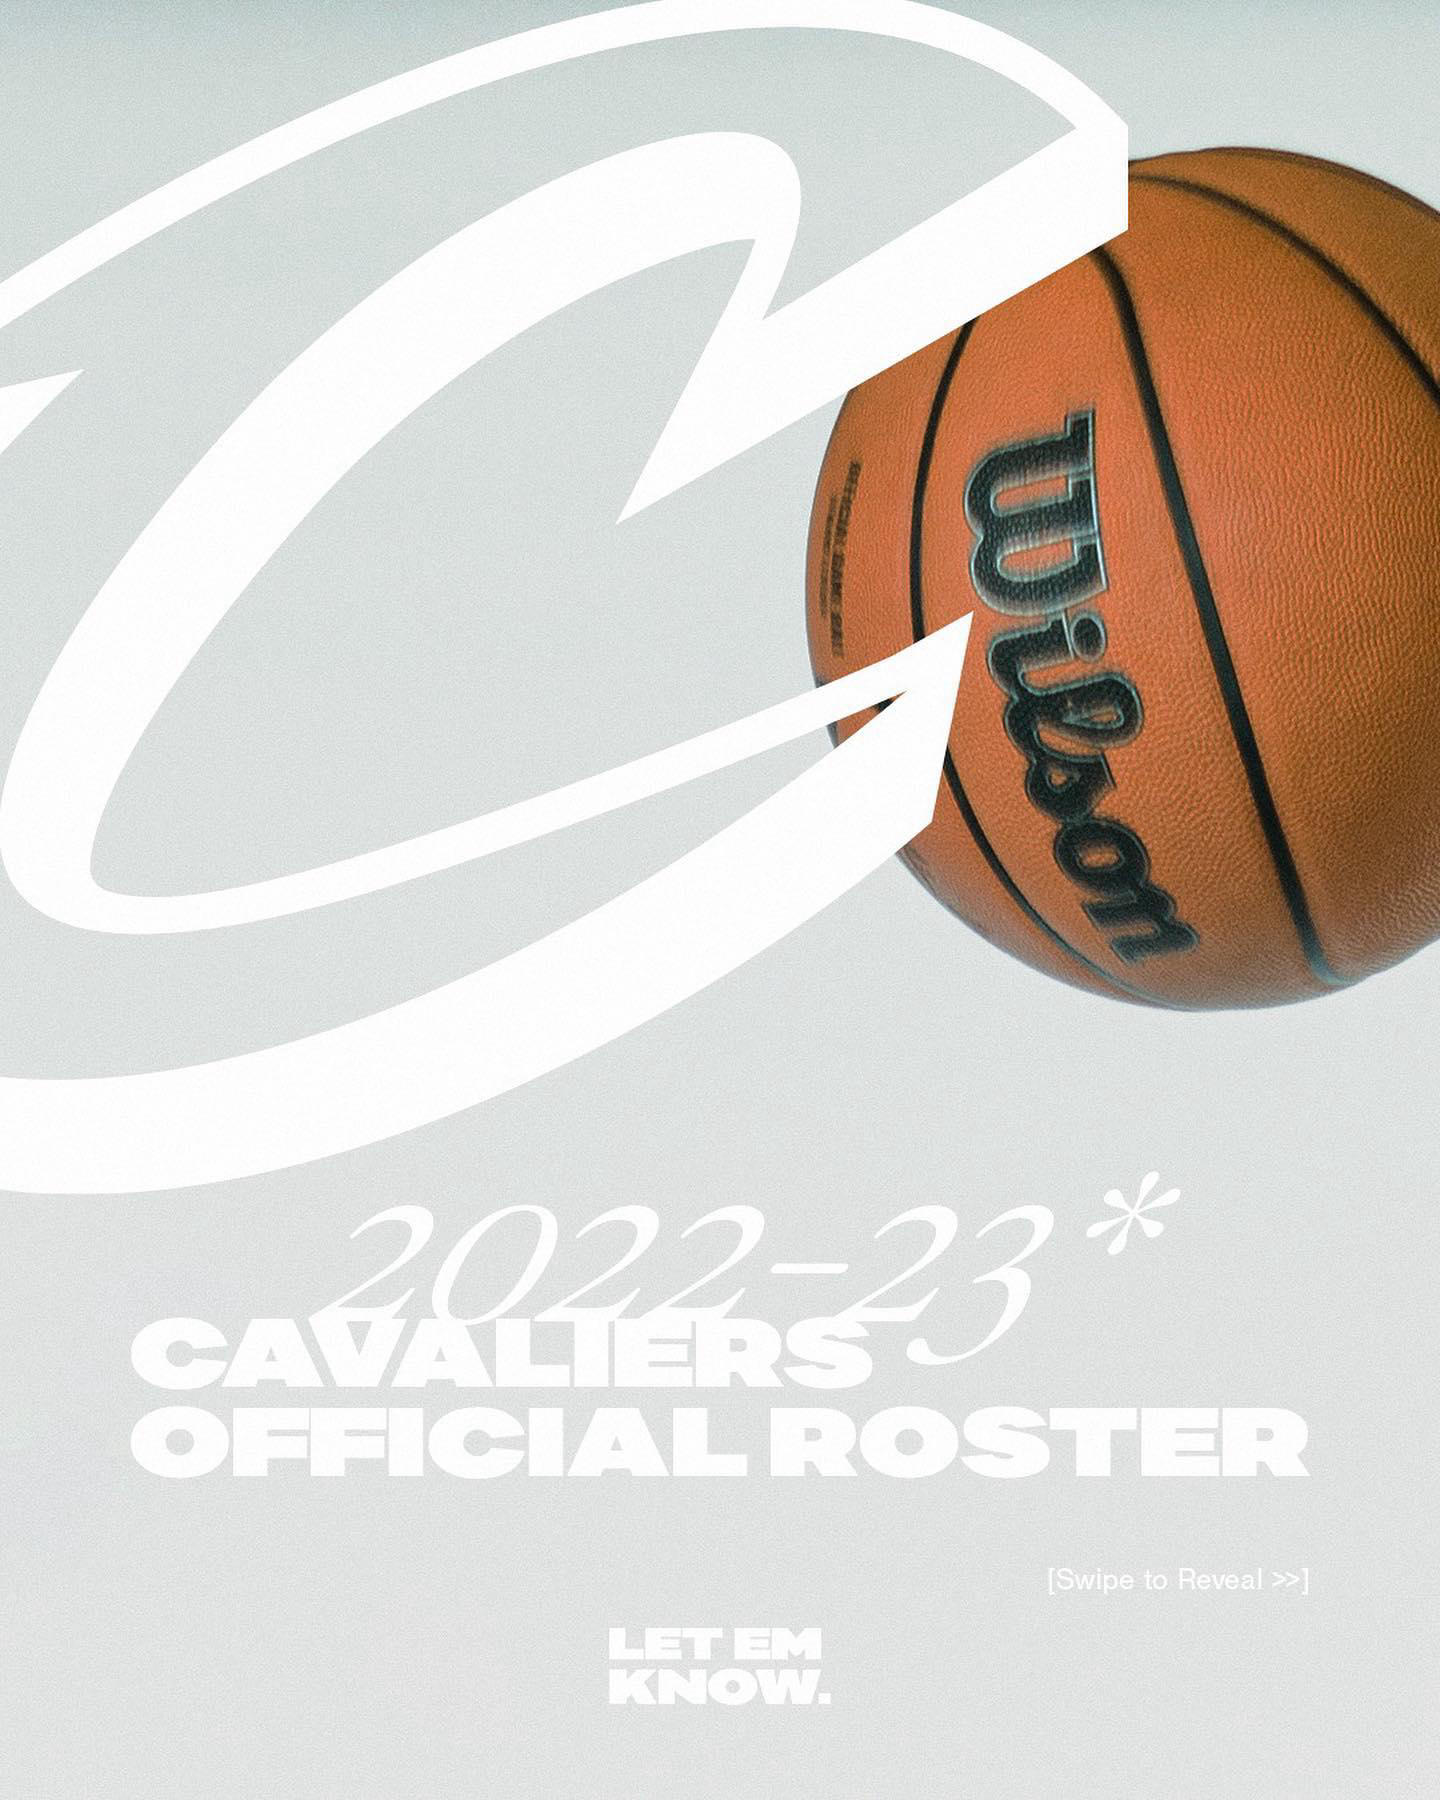 Cleveland Cavaliers - The 2022-23 Squad